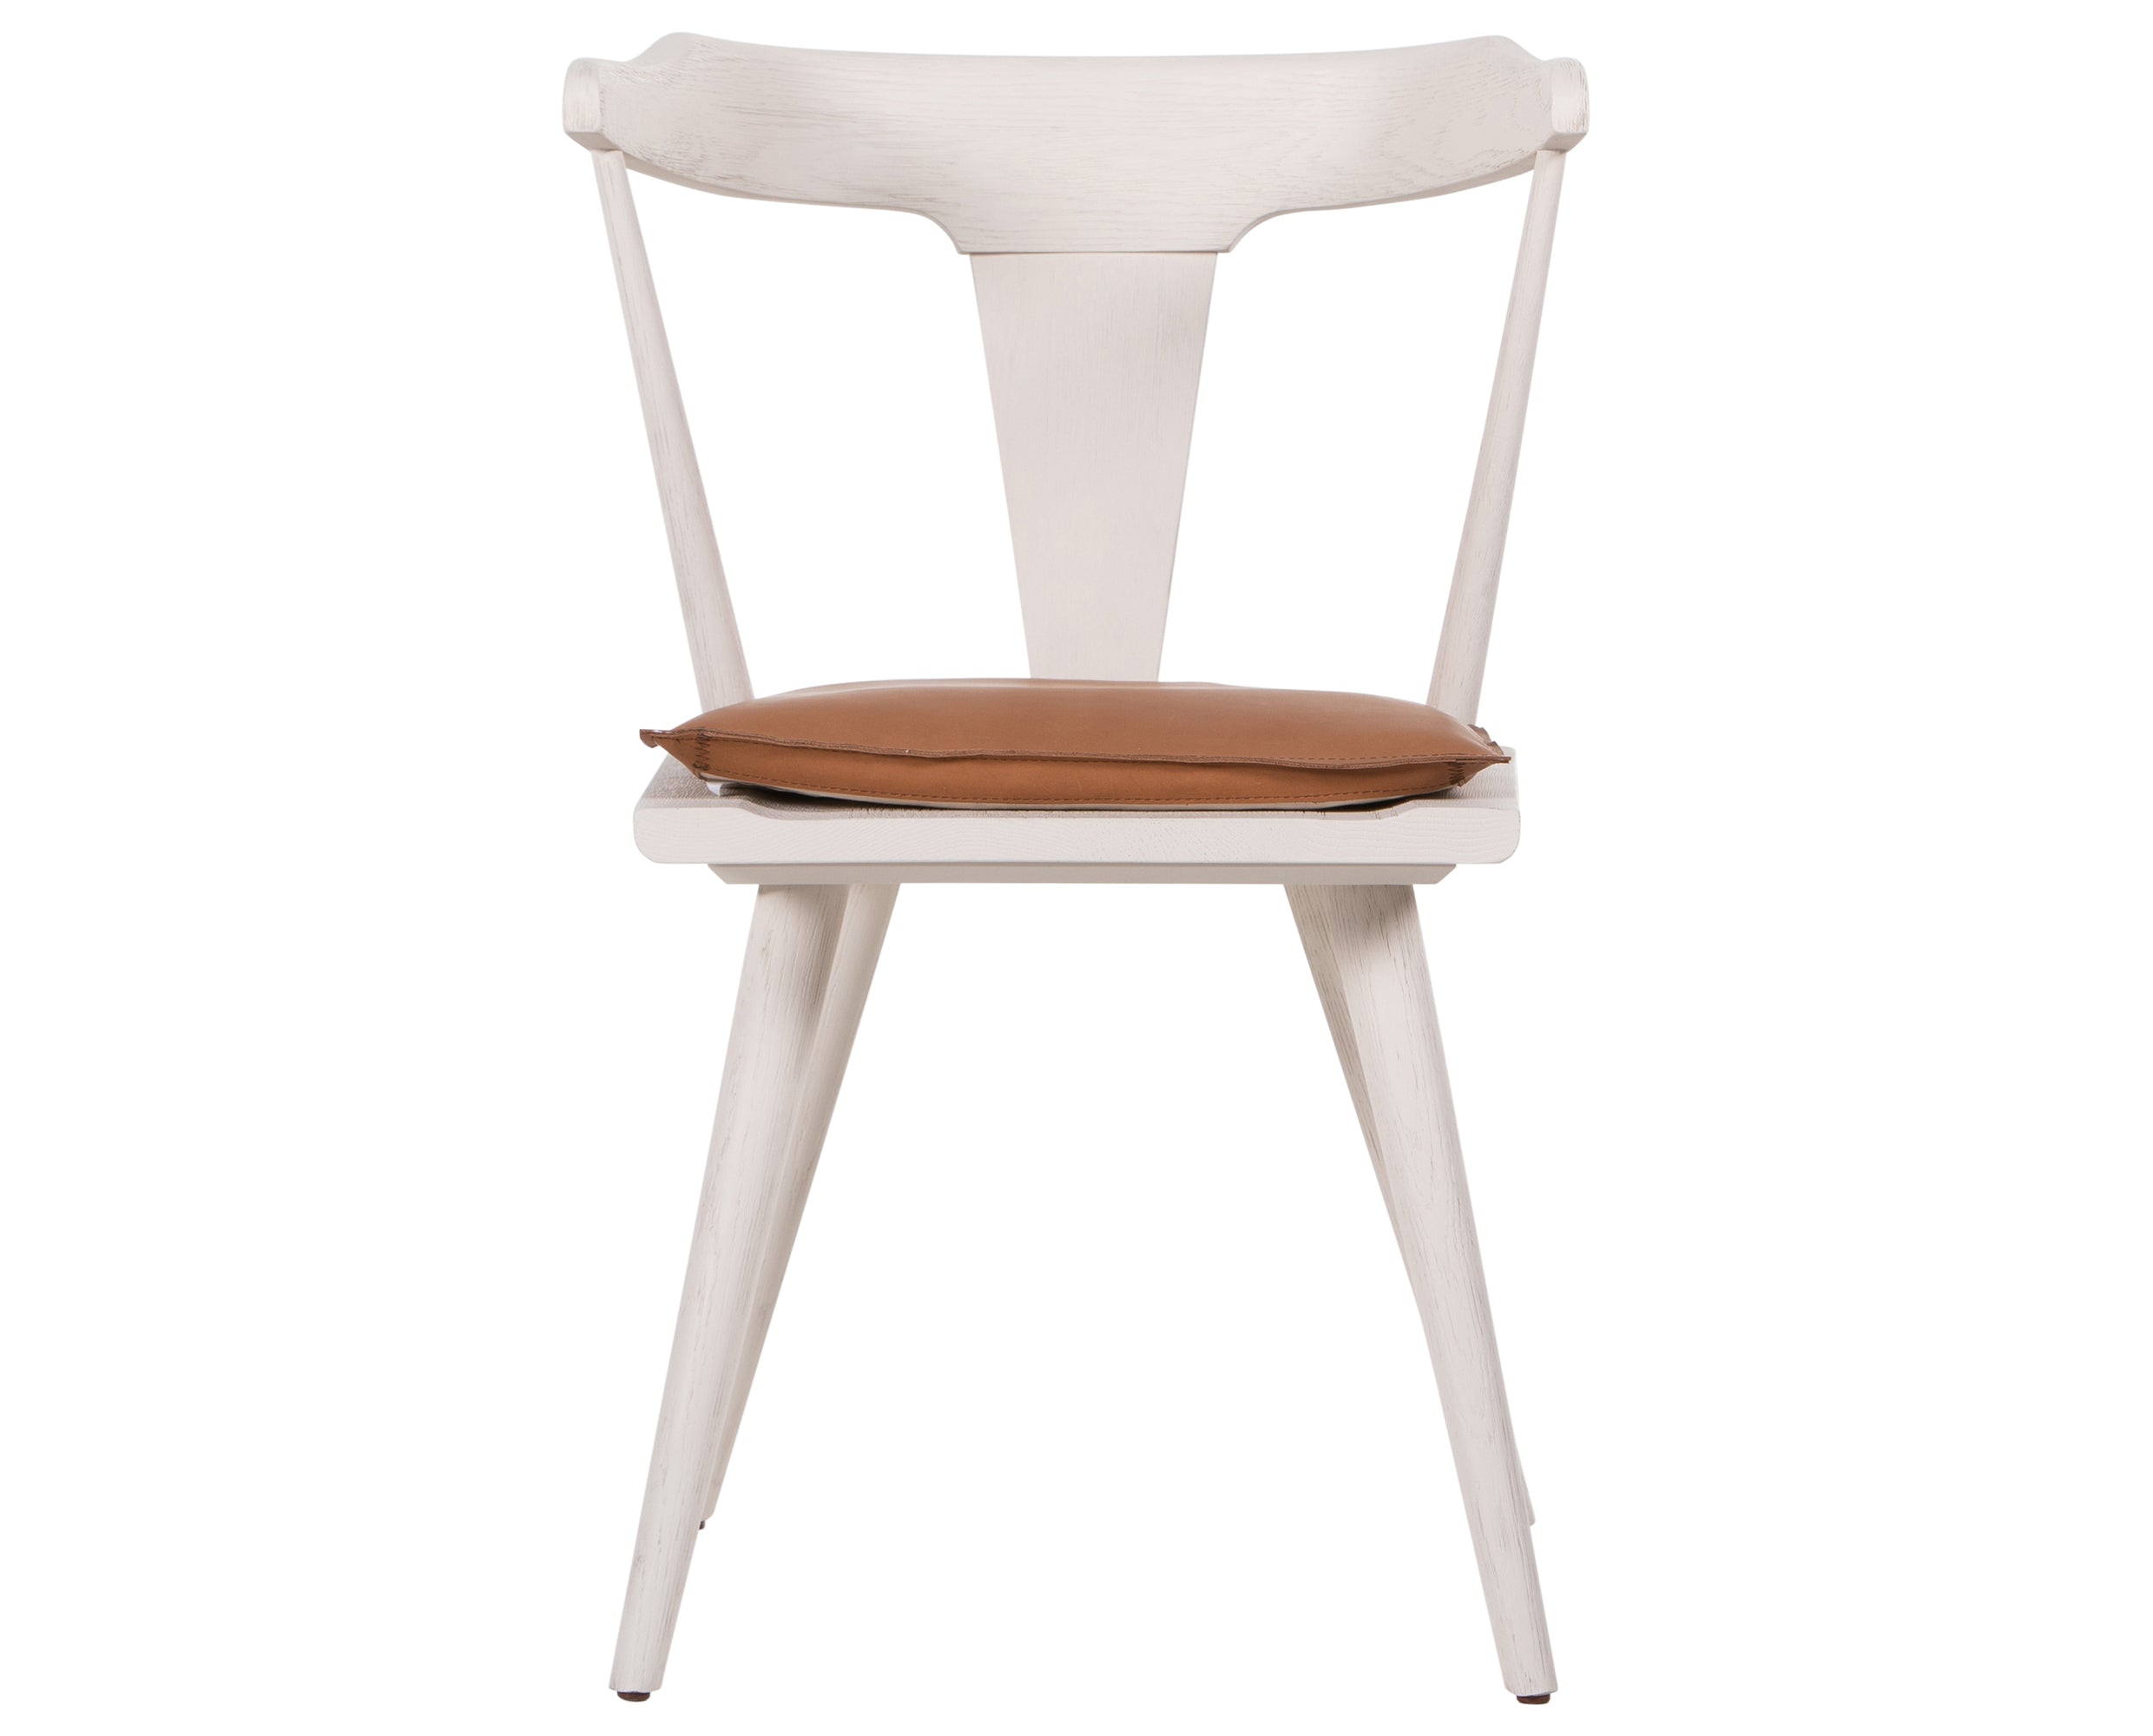 Off White Oak and Whiskey Saddle Leather with Ivory Backing Fabric | Ripley Dining Chair | Valley Ridge Furniture